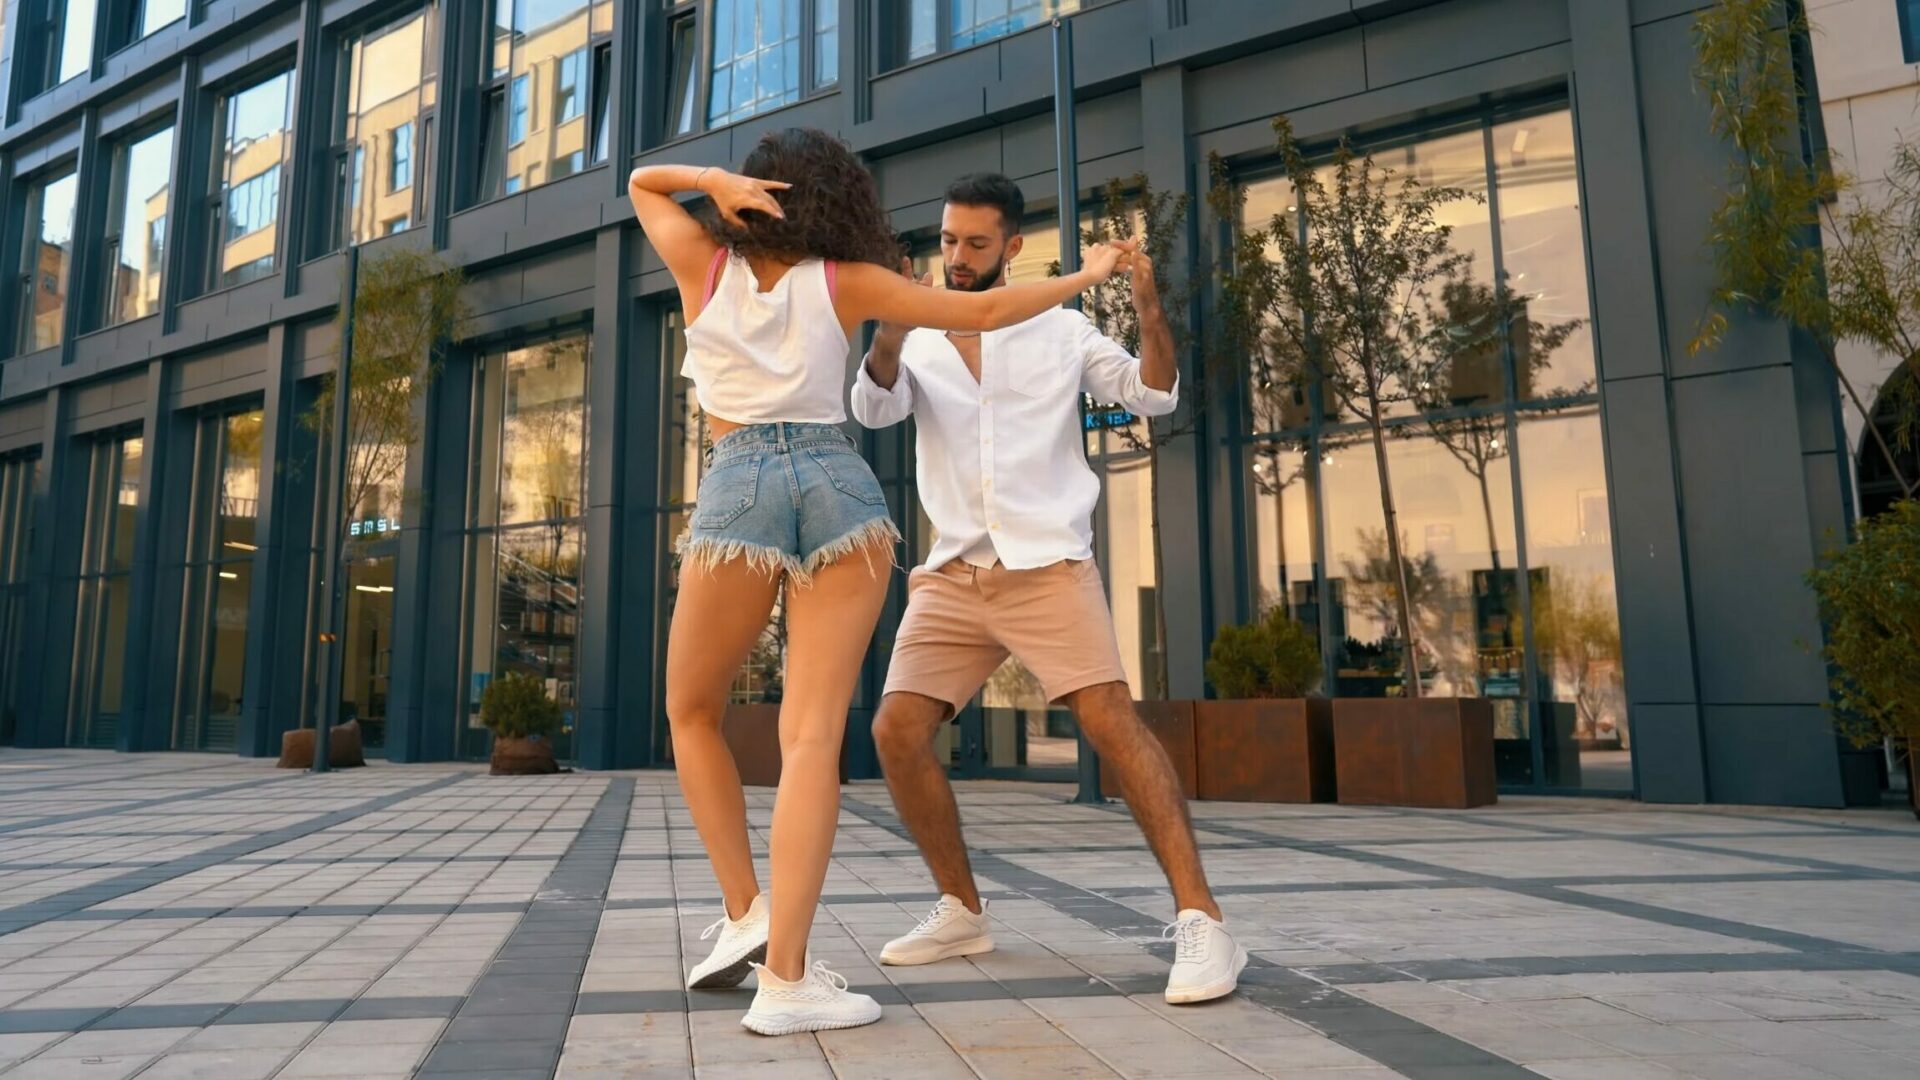 Woman in blue shorts and white top dancing bachata on the street with a man in beige shorts and white shirt